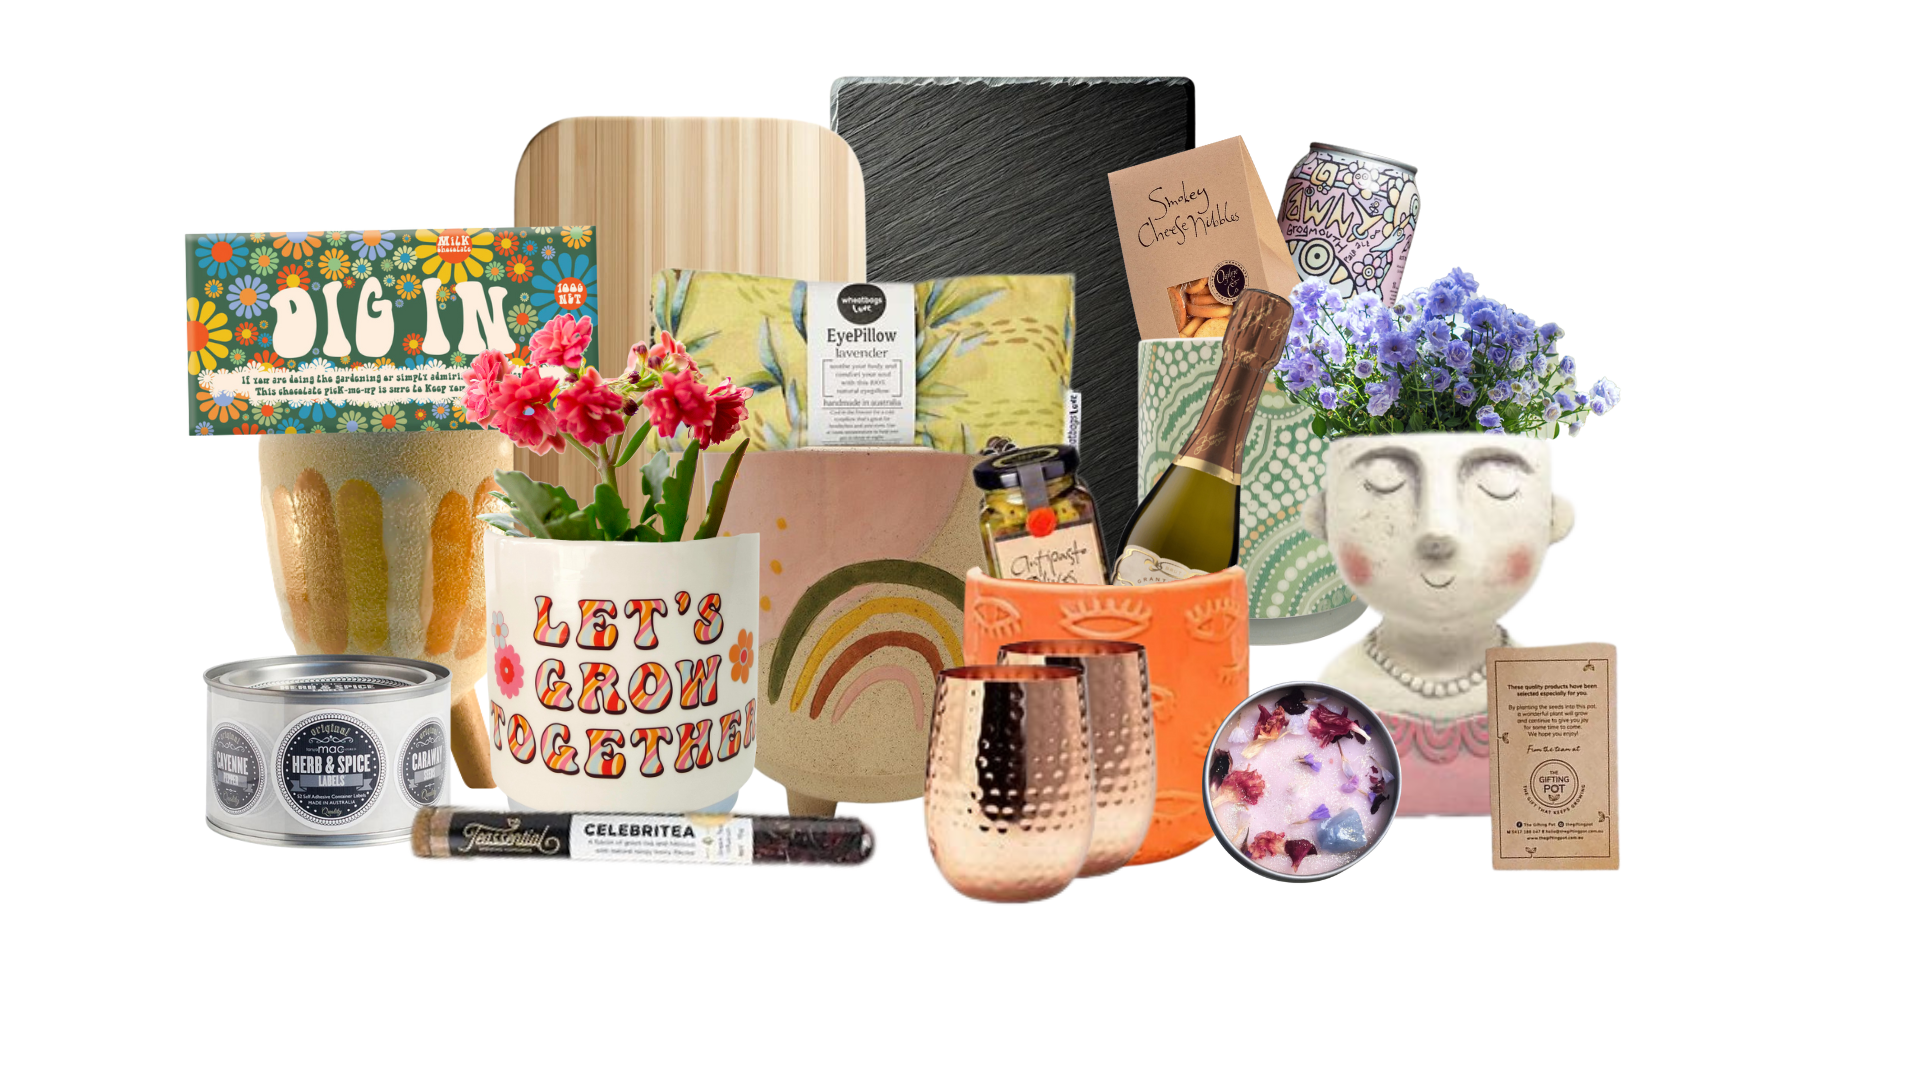 uNIQUE GIFT HAMPERS, BUSINESS GIFTS, CORPORATE GIFTS